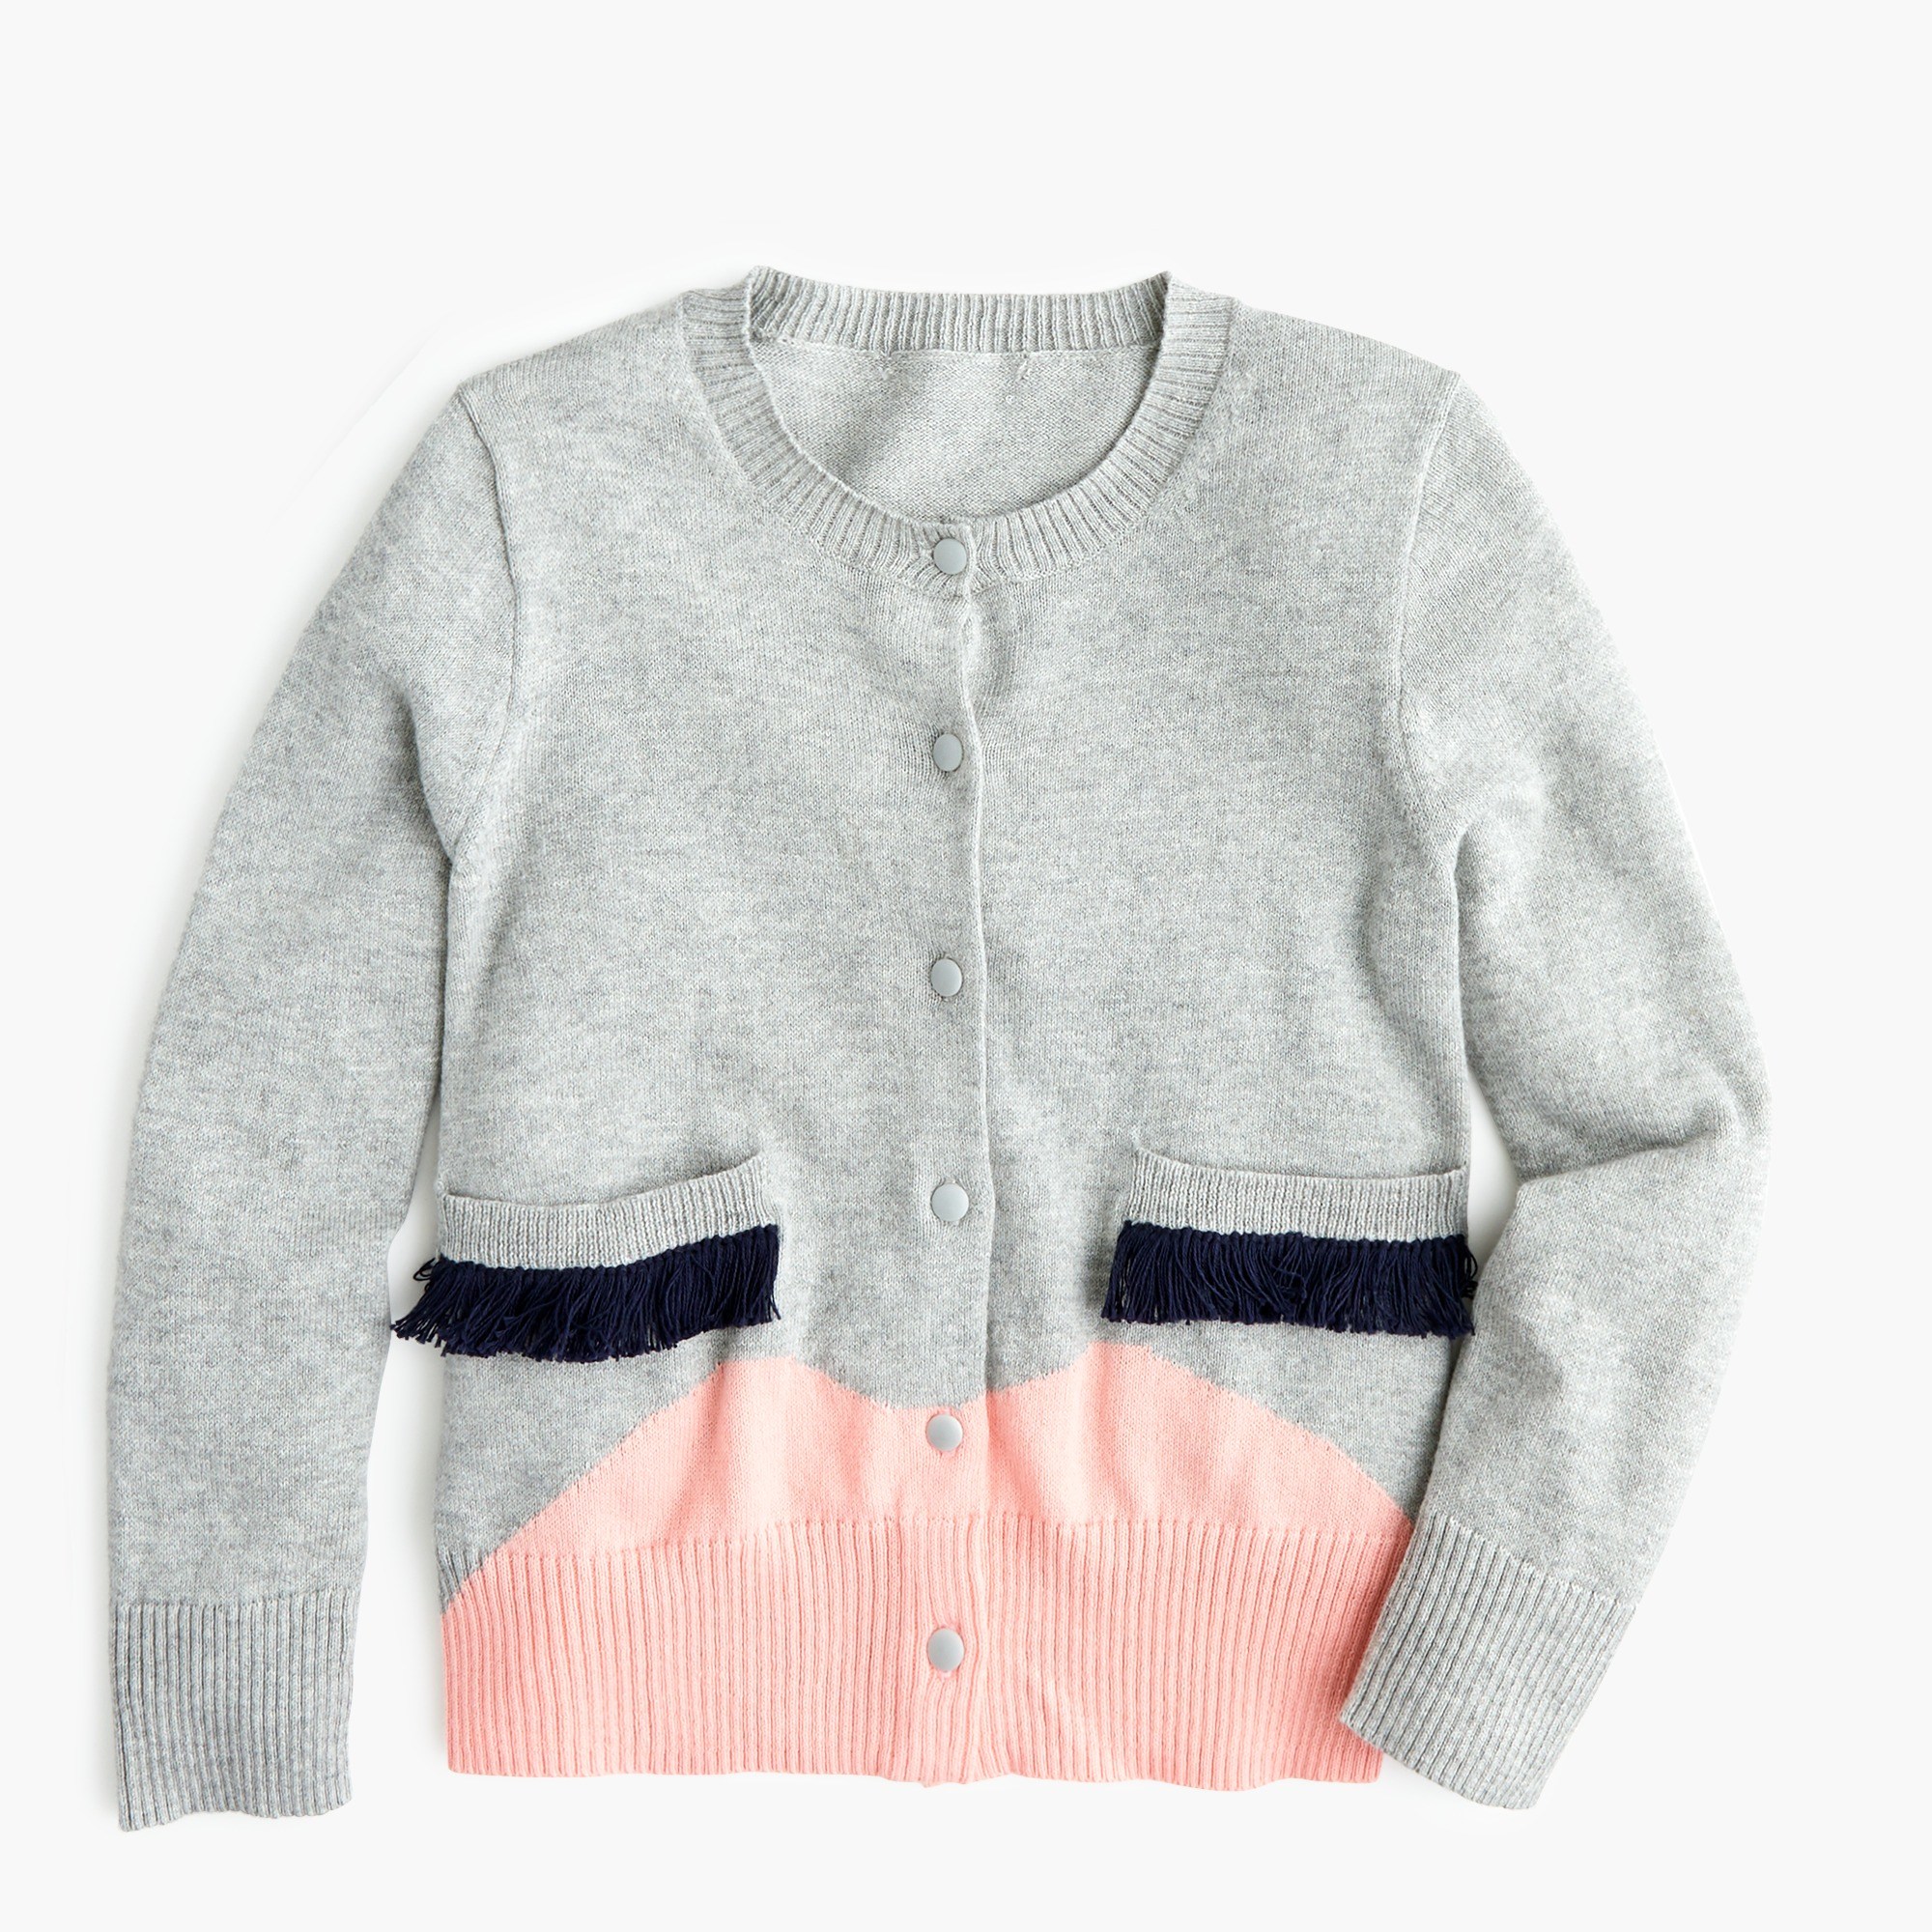 Girls' cardigan sweater with face : Girl cardigans | J.Crew